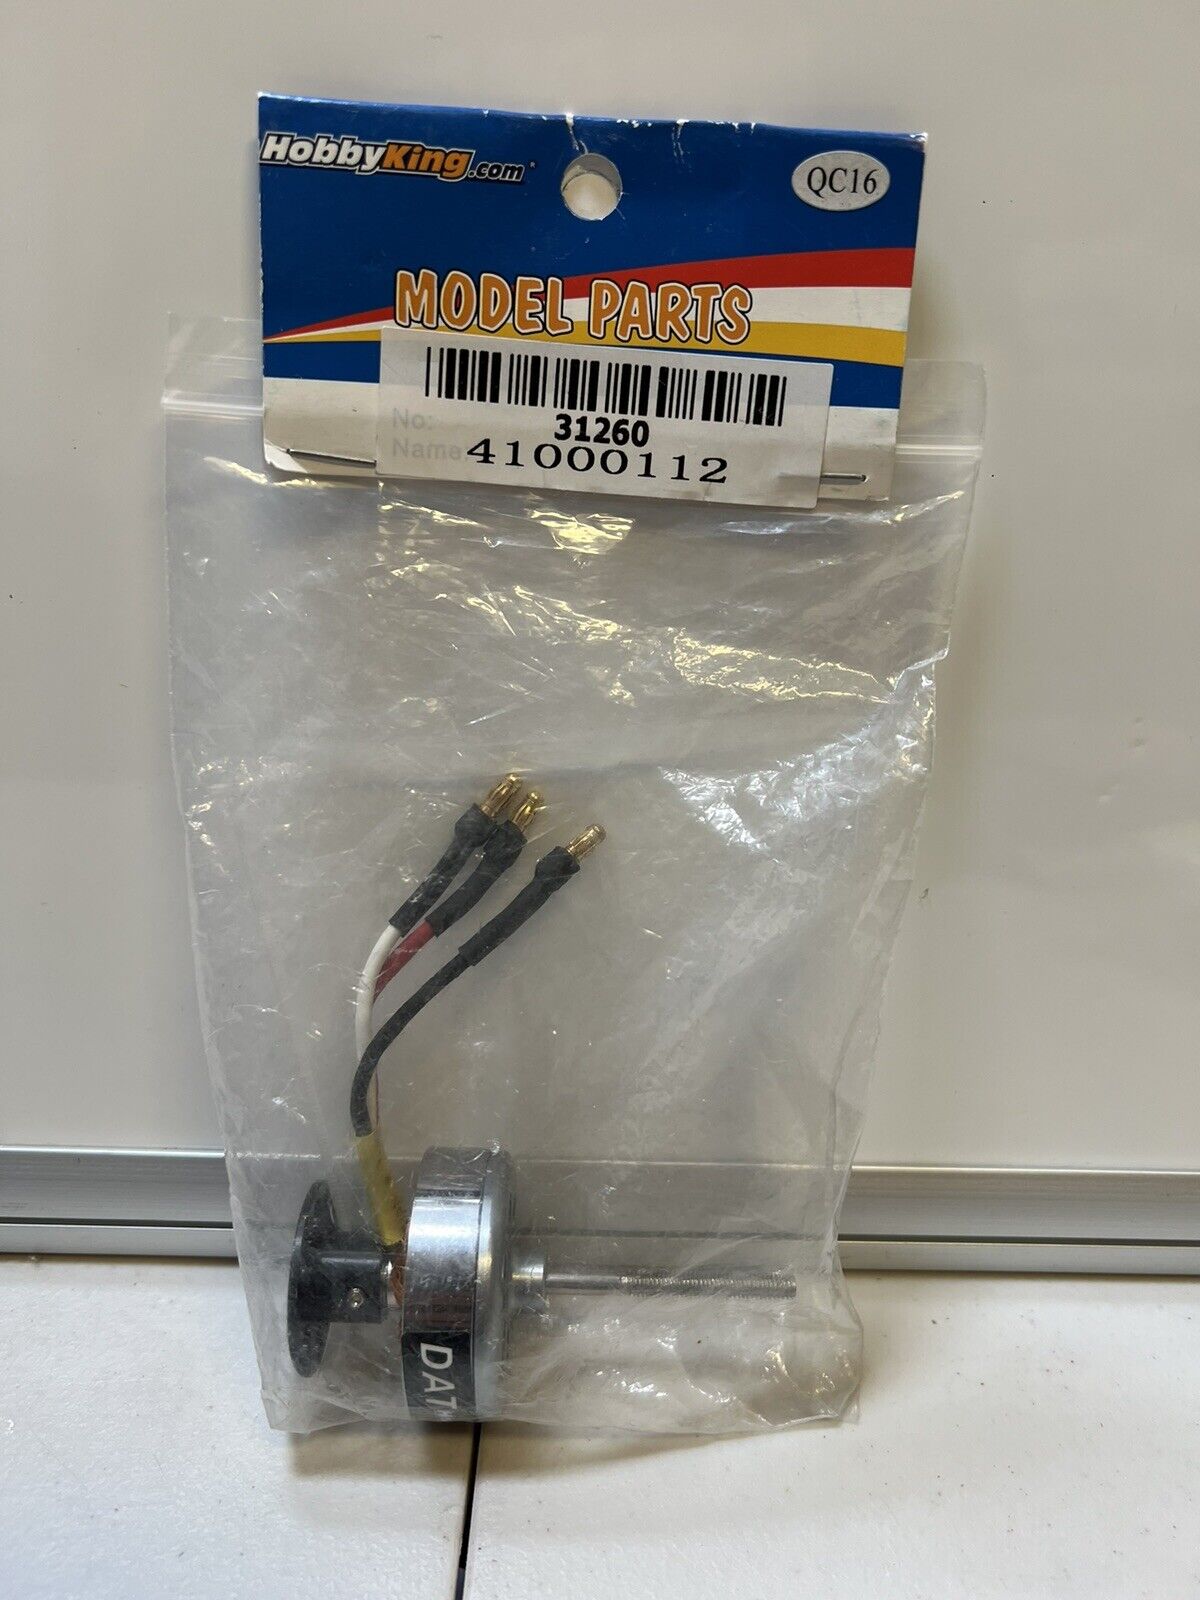 @ Hobbyking Model Parts 31260 Club Trainer 1265mm Replacement Motor NEW